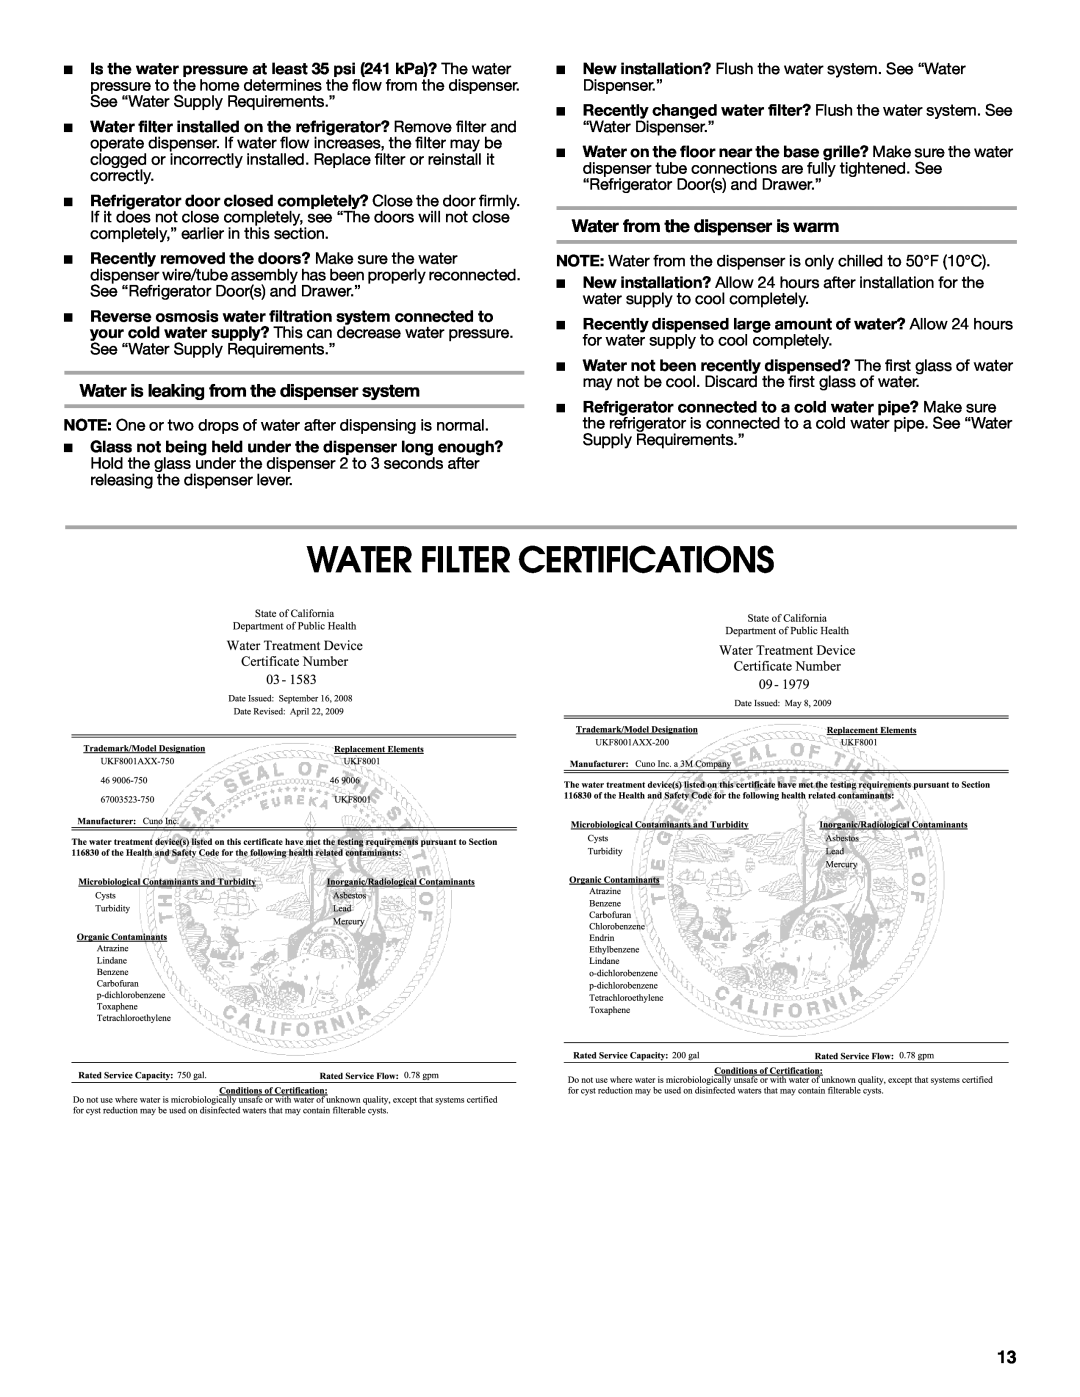 Jenn-Air W10276070A installation instructions Water Filter Certifications, Water is leaking from the dispenser system 